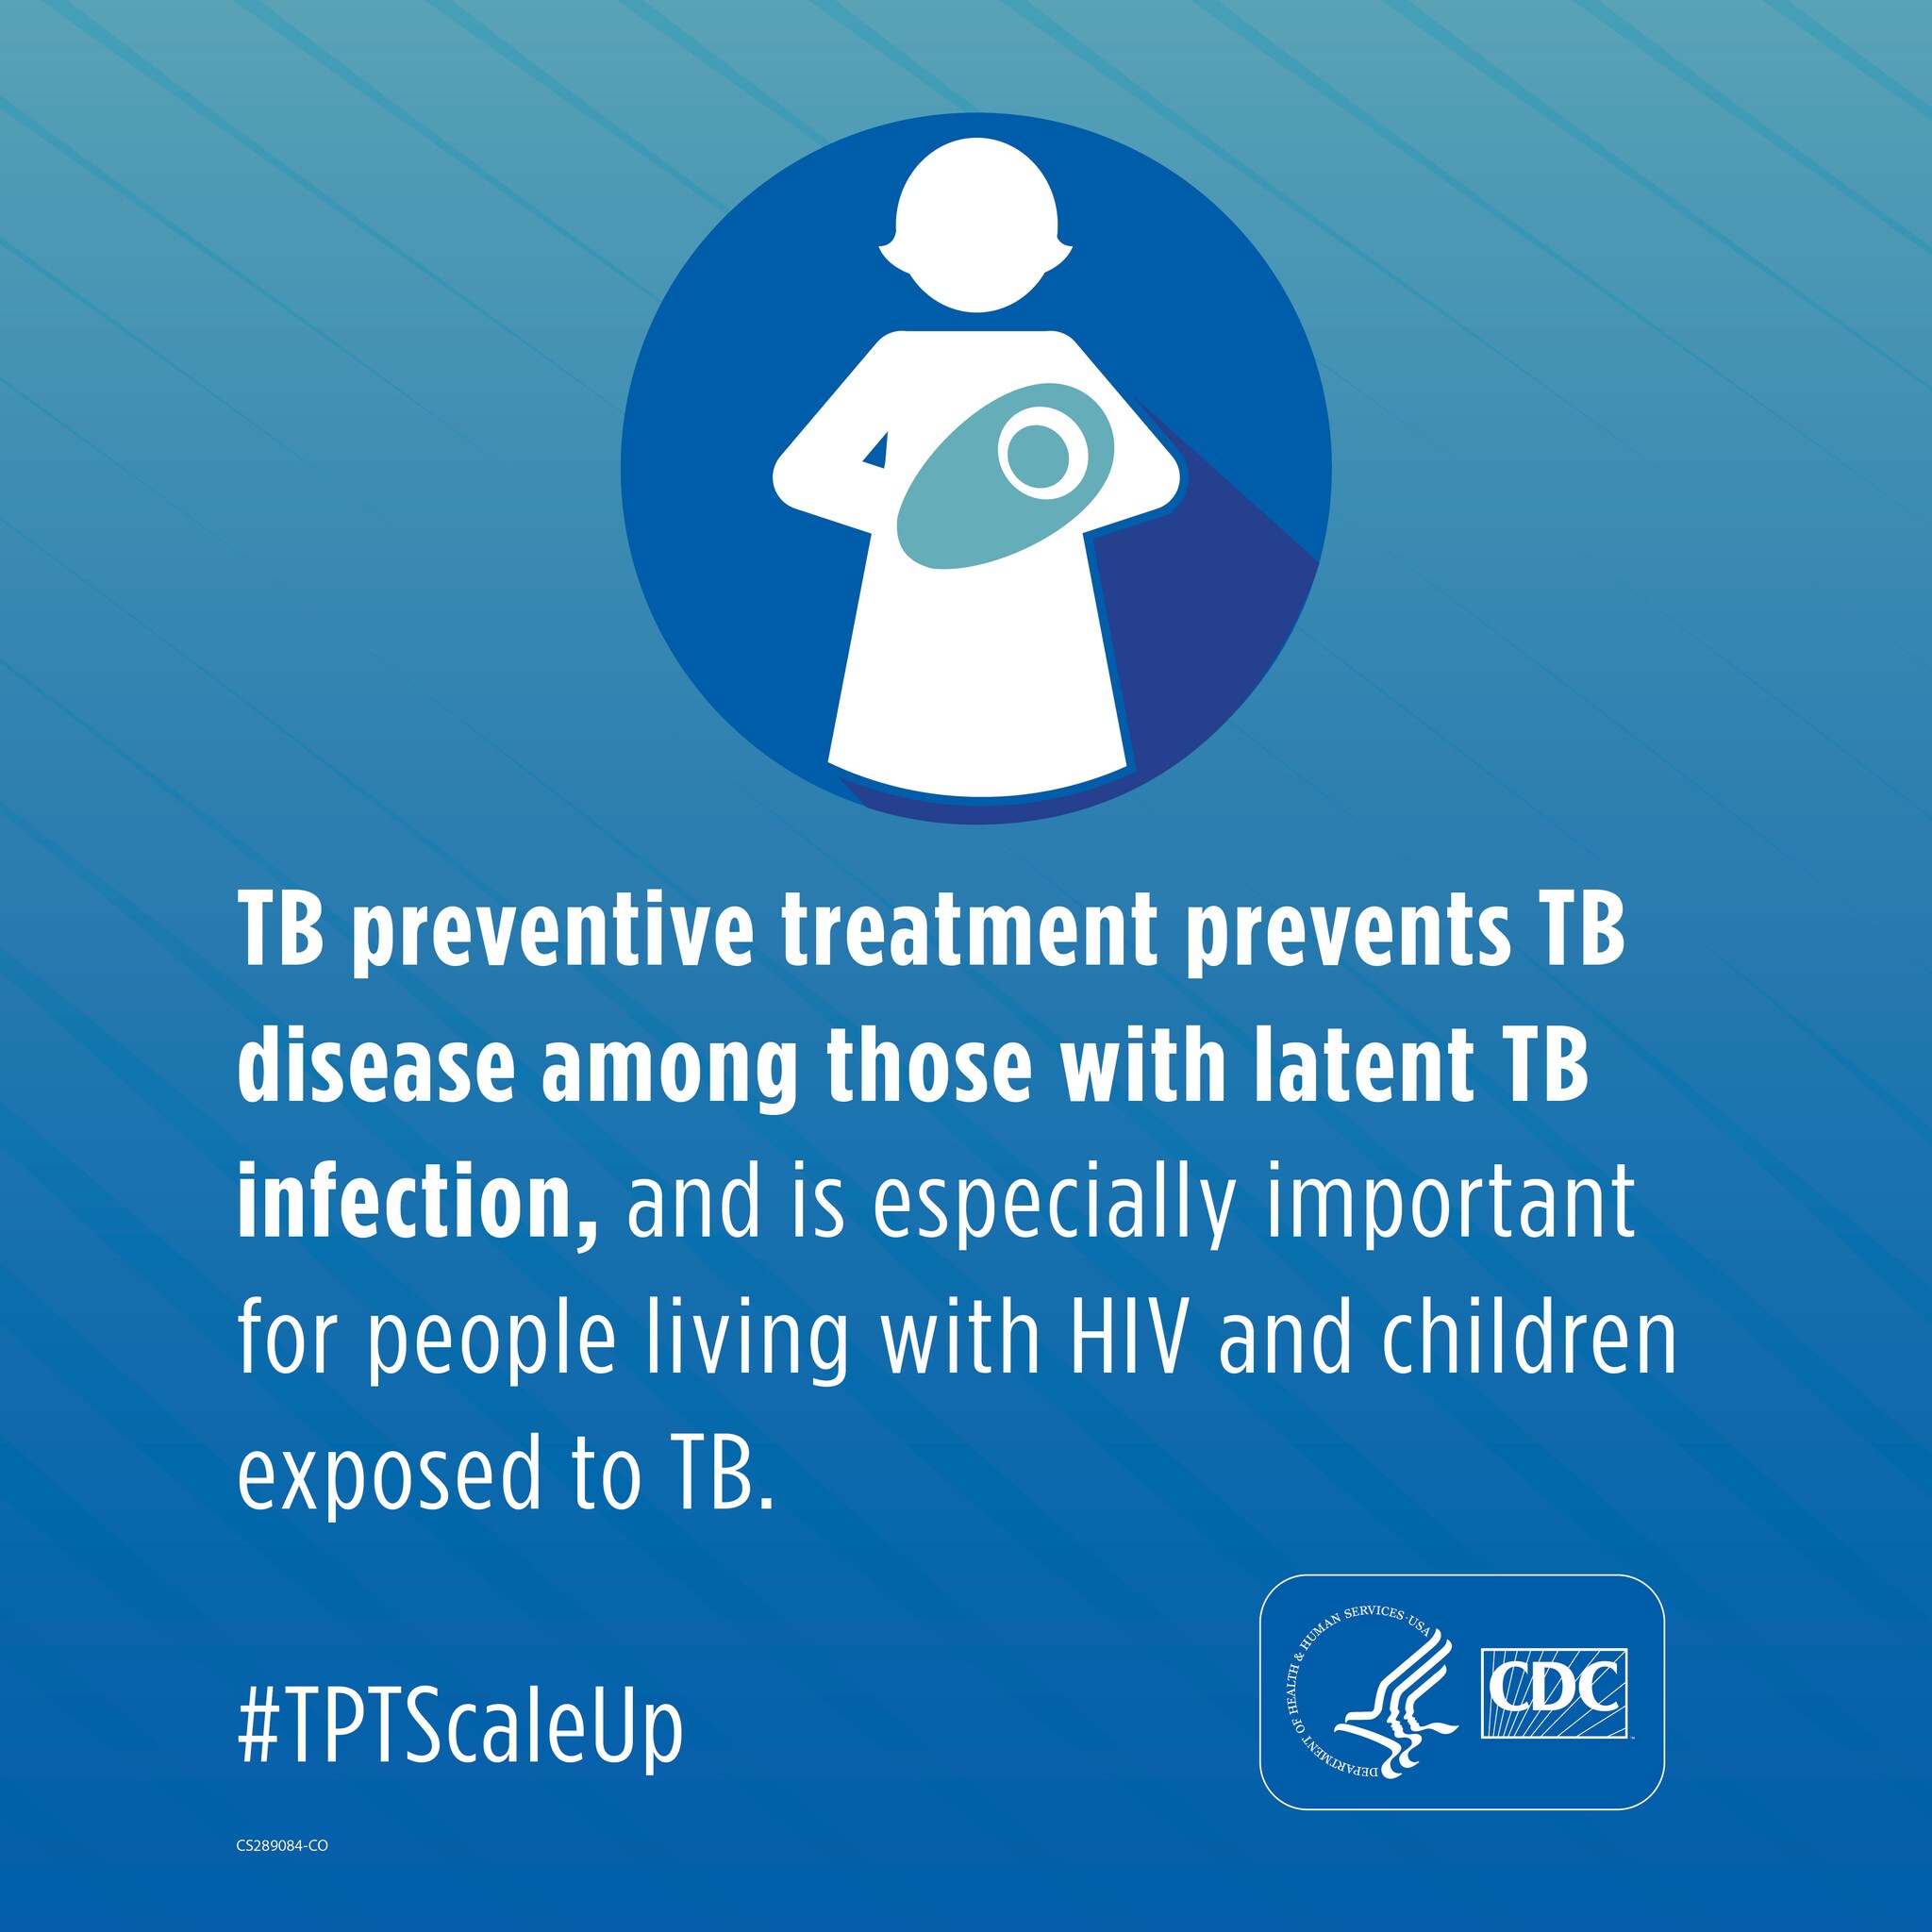 TB preventative treatment prevents TB in those with latent TB infection, and is especially important for people living with HIV and children exposed to TB